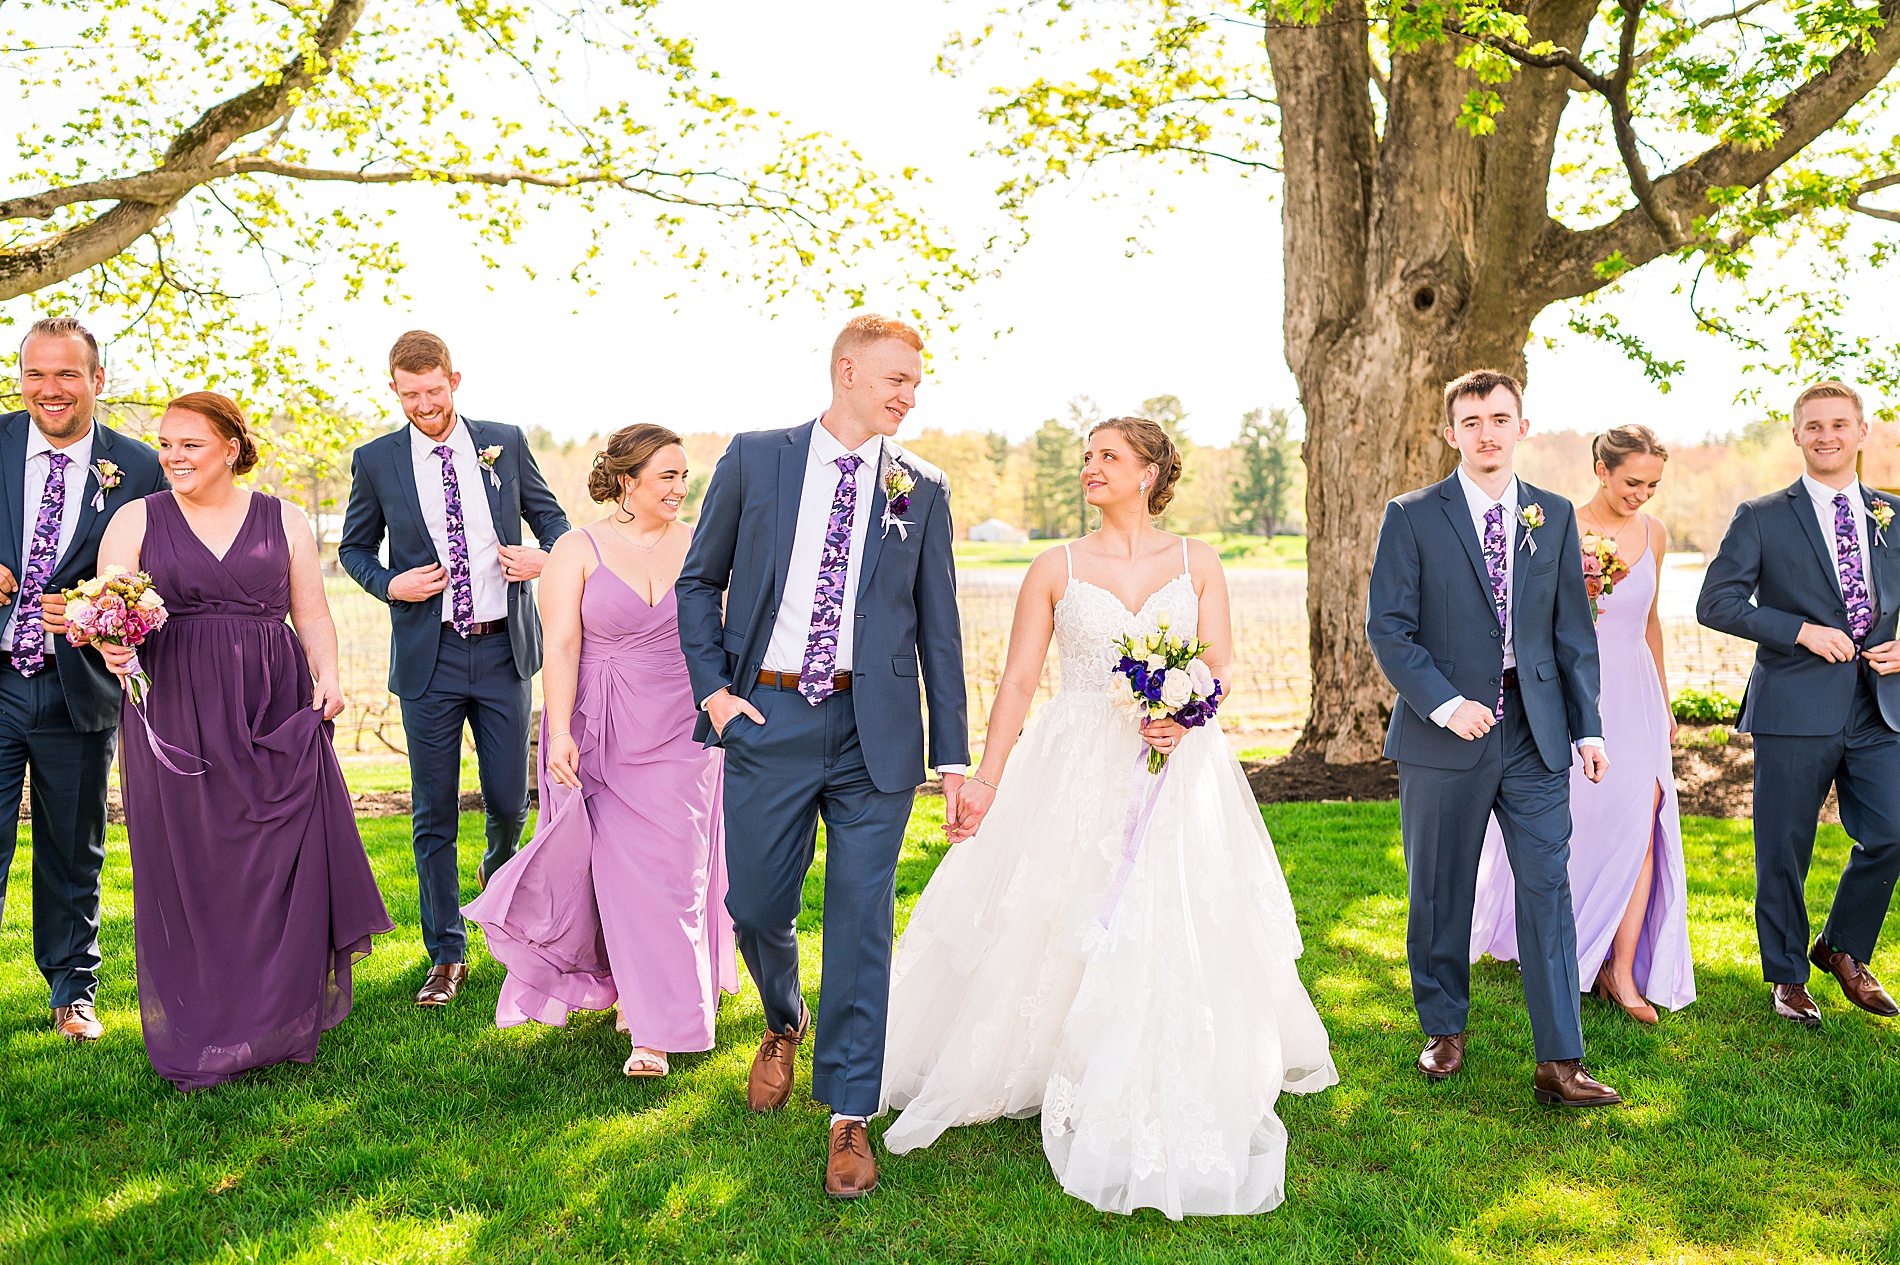 bride and groom hold hands as wedding party walks behind them